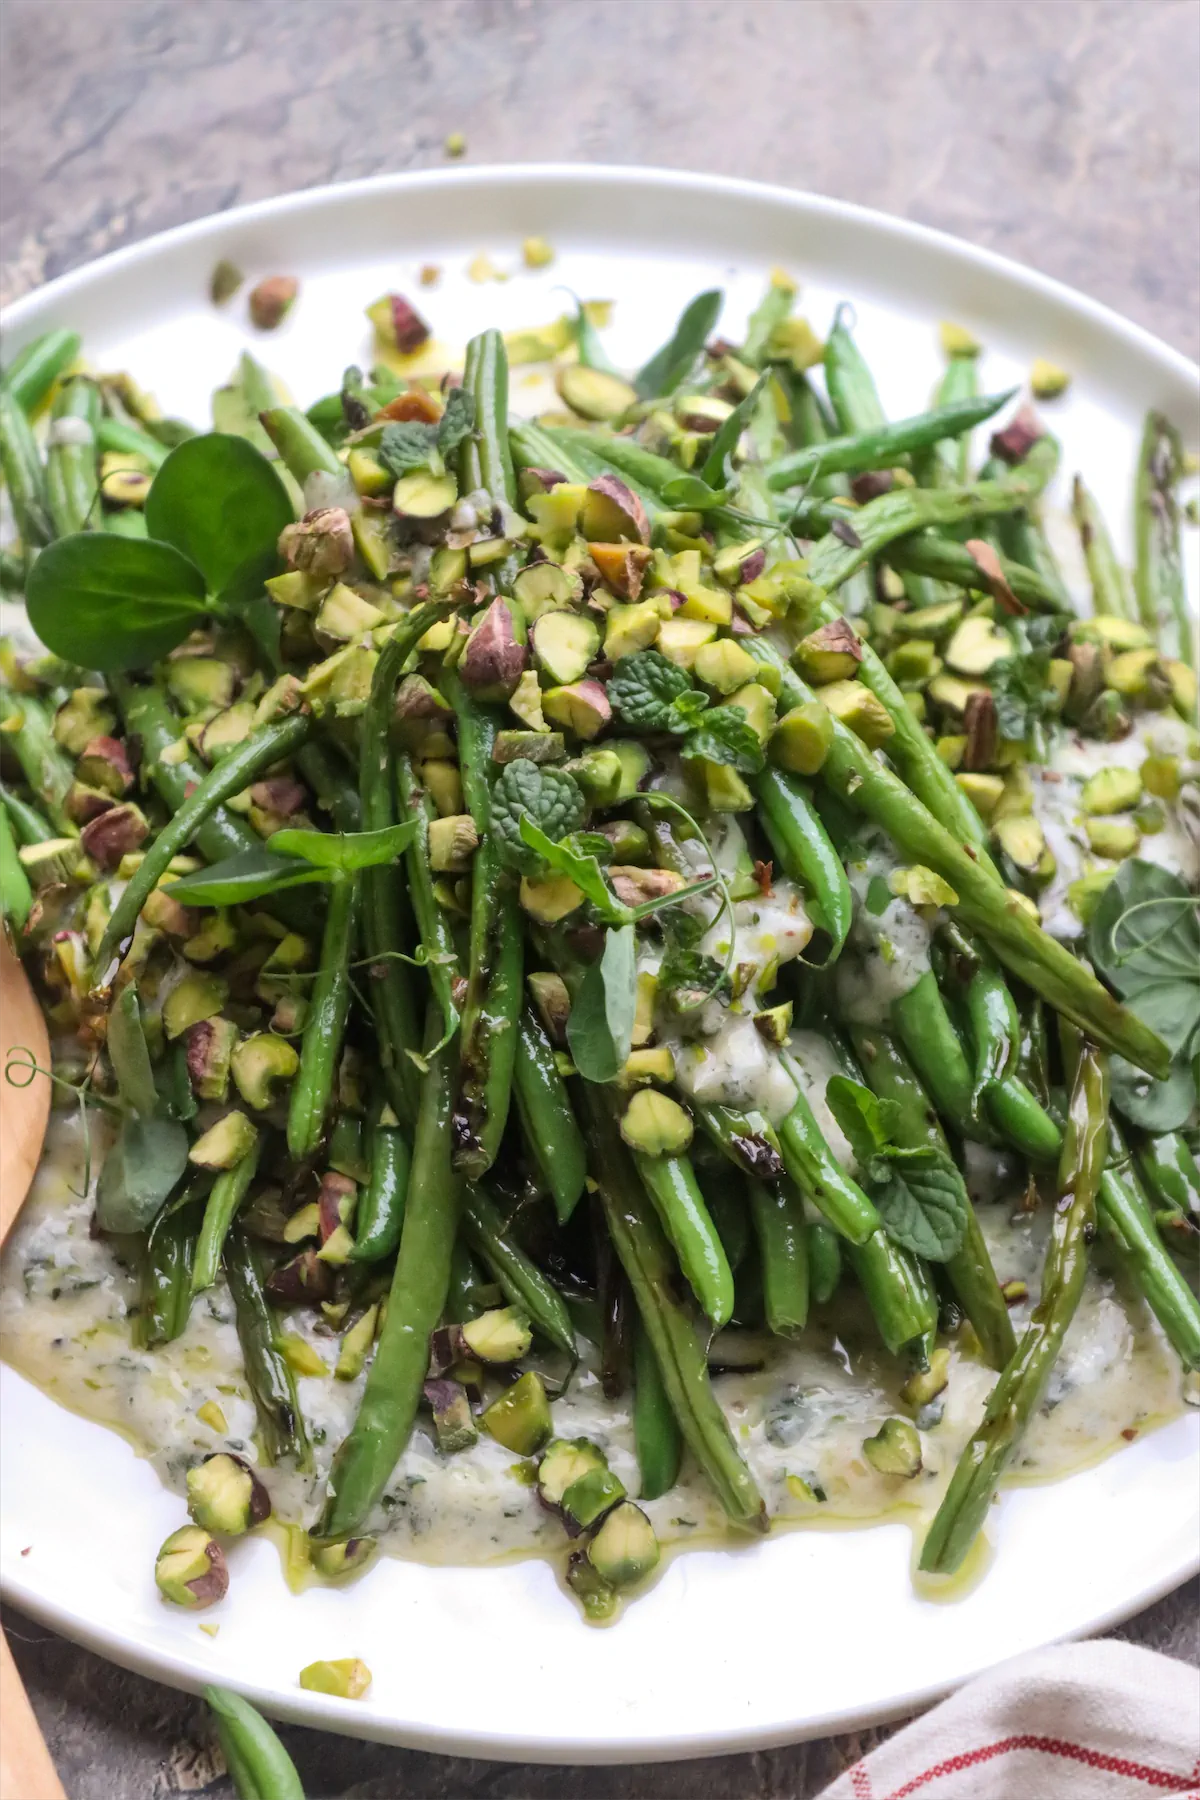 On the plate, a grilled green bean salad is dressed with yogurt and mint and garnished with pistachios